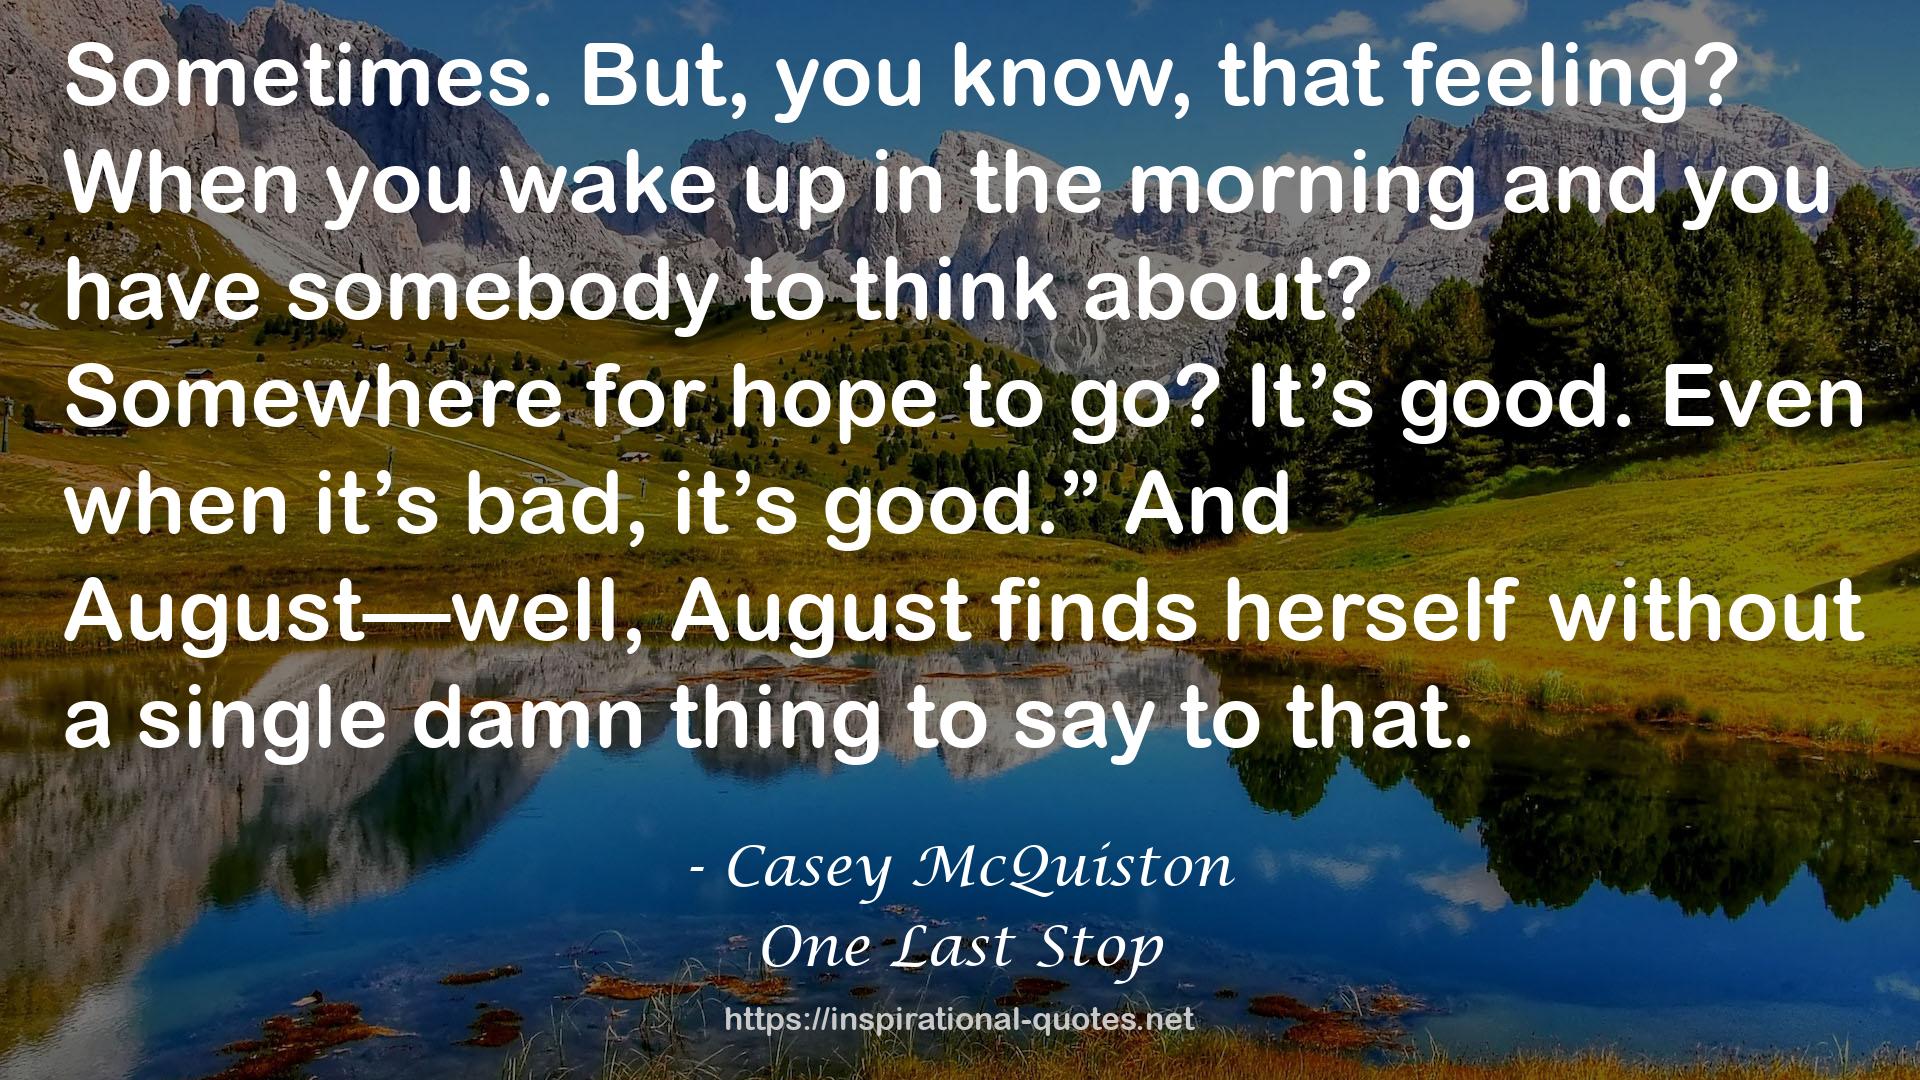 One Last Stop QUOTES